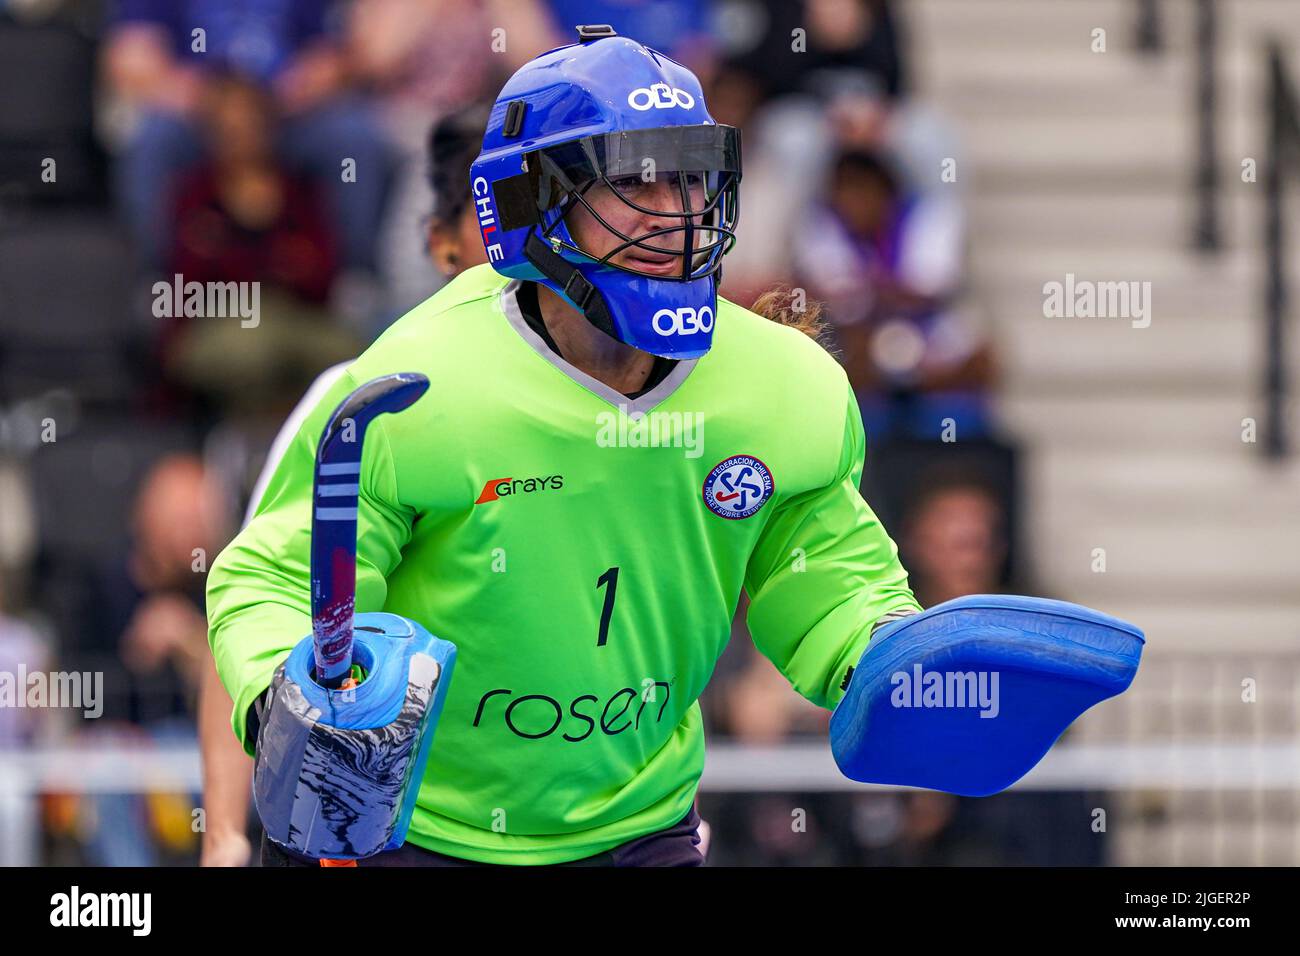 AMSTELVEEN, NETHERLANDS - JULY 10: Goalkeeper Claudia Schuler of Chile during the FIH Hockey Women's World Cup 2022 match between China and Chile at the Wagener Hockey Stadium on July 10, 2022 in Amstelveen, Netherlands (Photo by Jeroen Meuwsen/Orange Pictures) Stock Photo